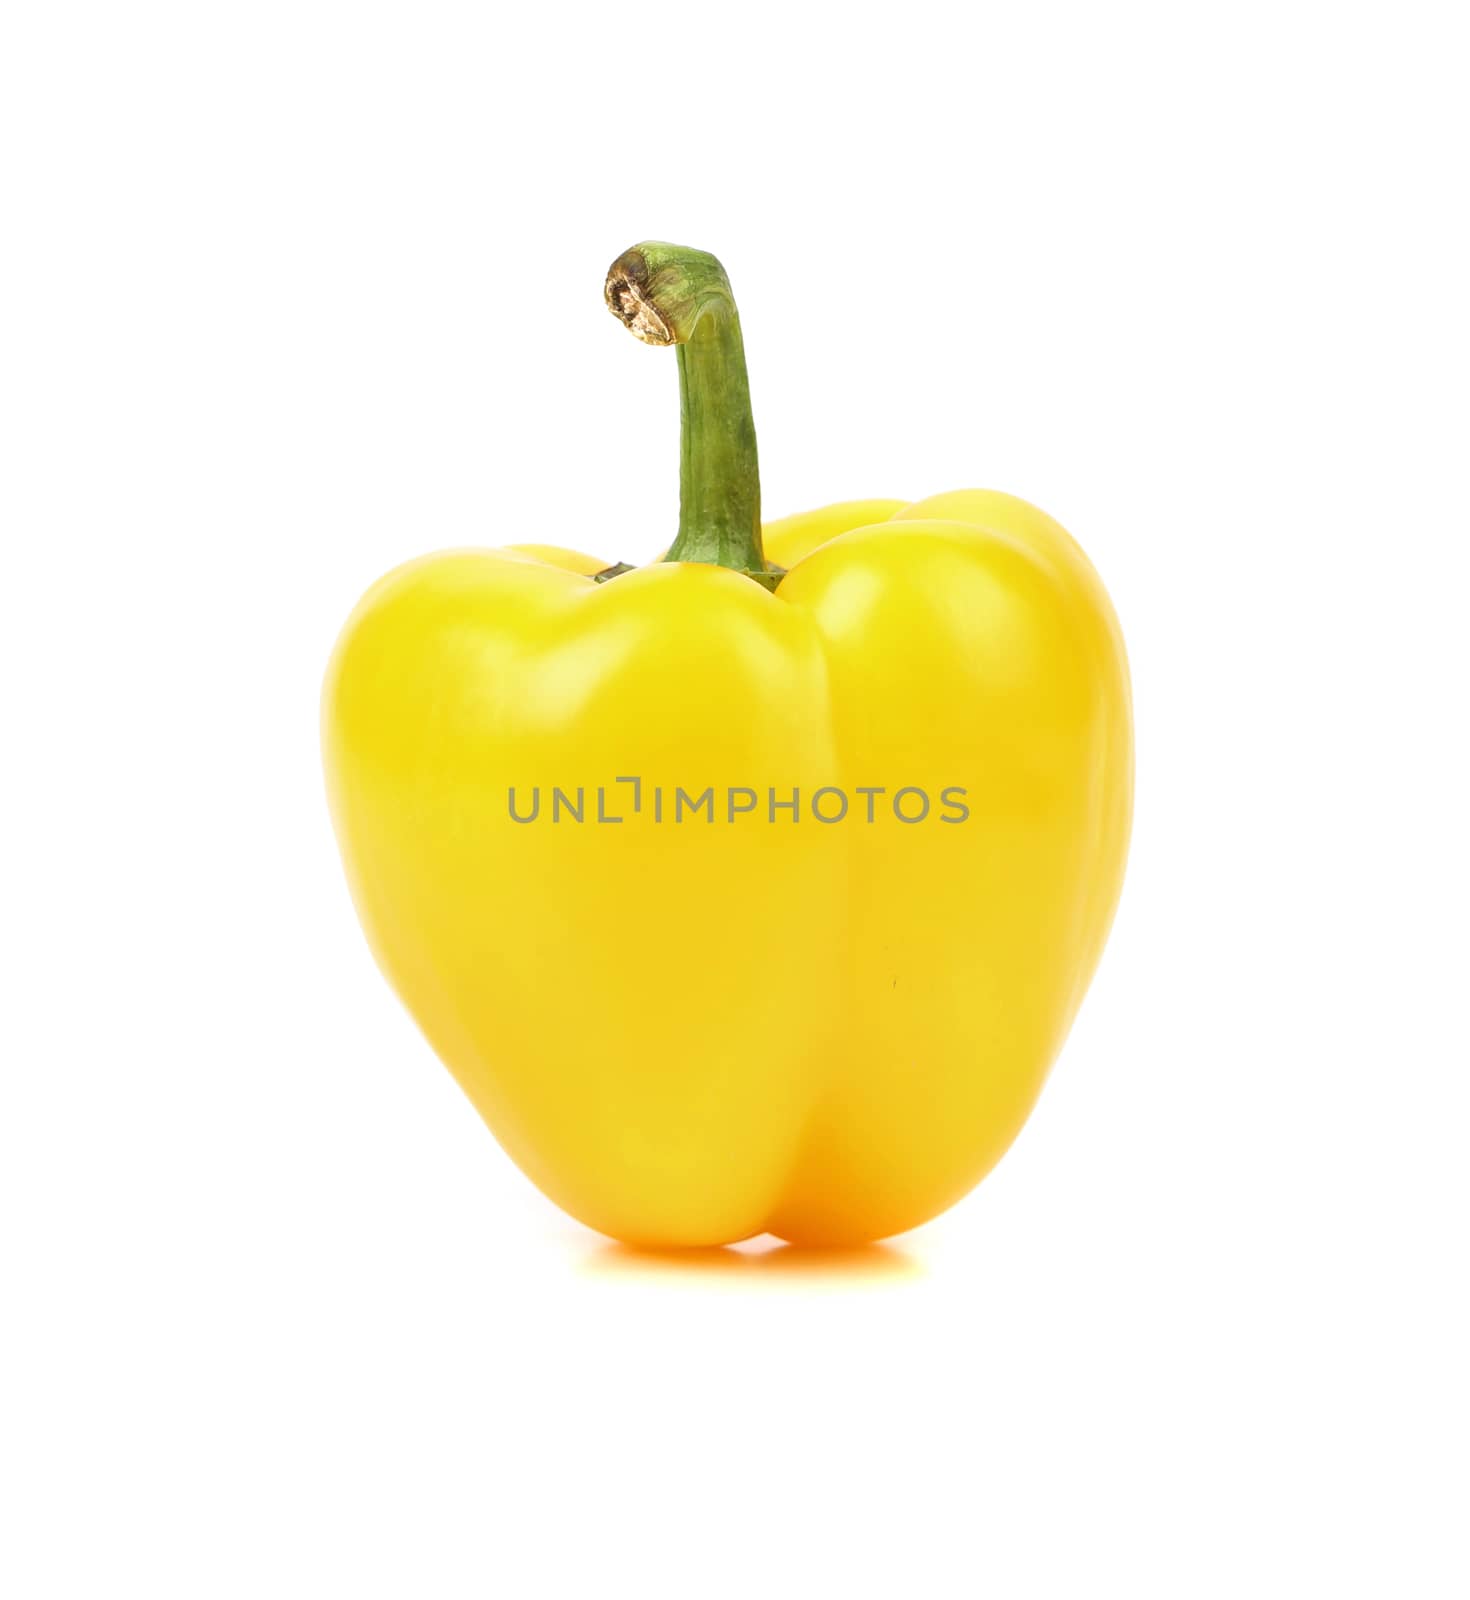 Yellow pepper isolated on a white background